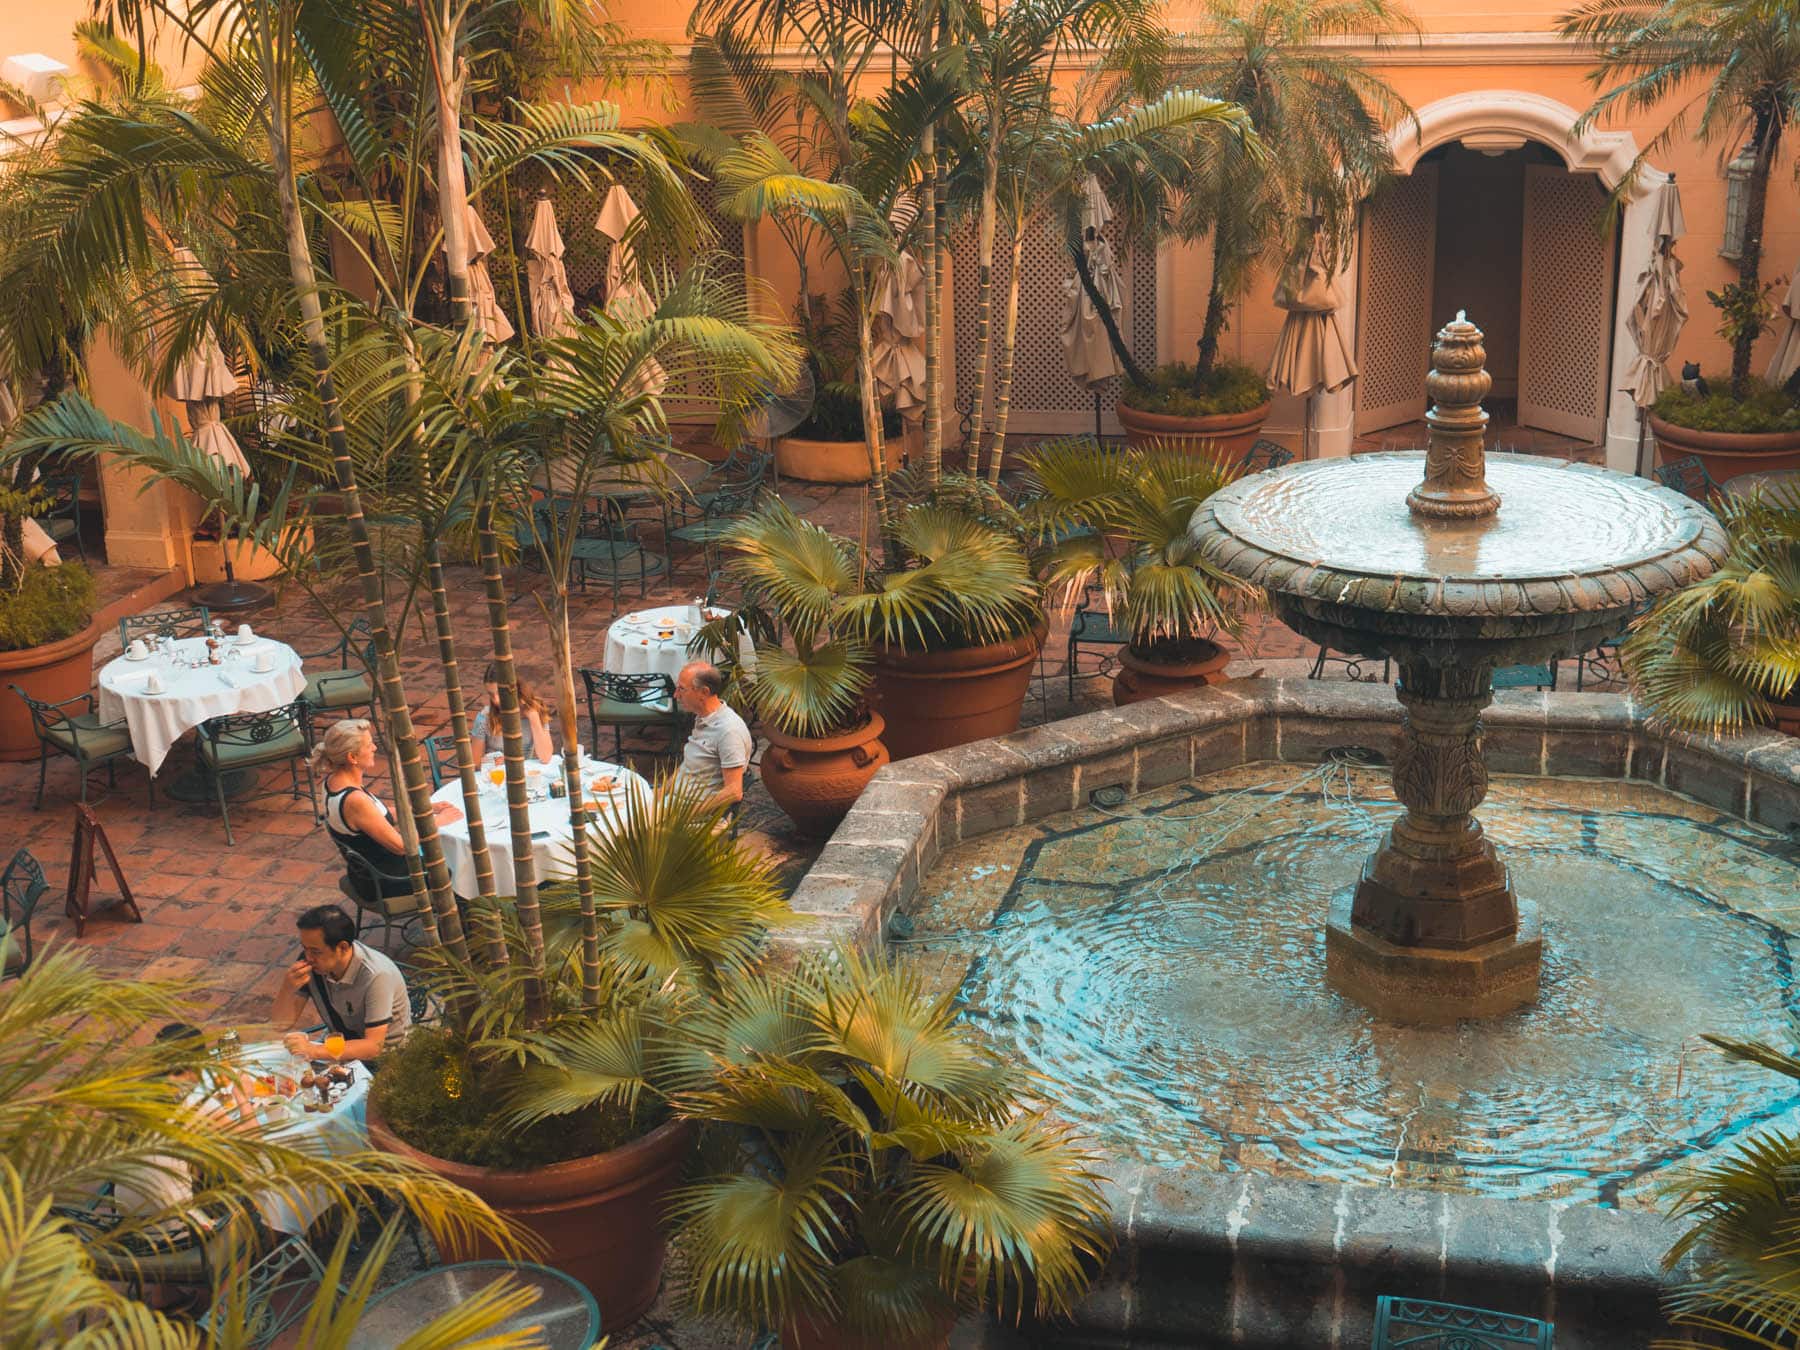 The Biltmore Hotel Coral Gables - Must See in Miami